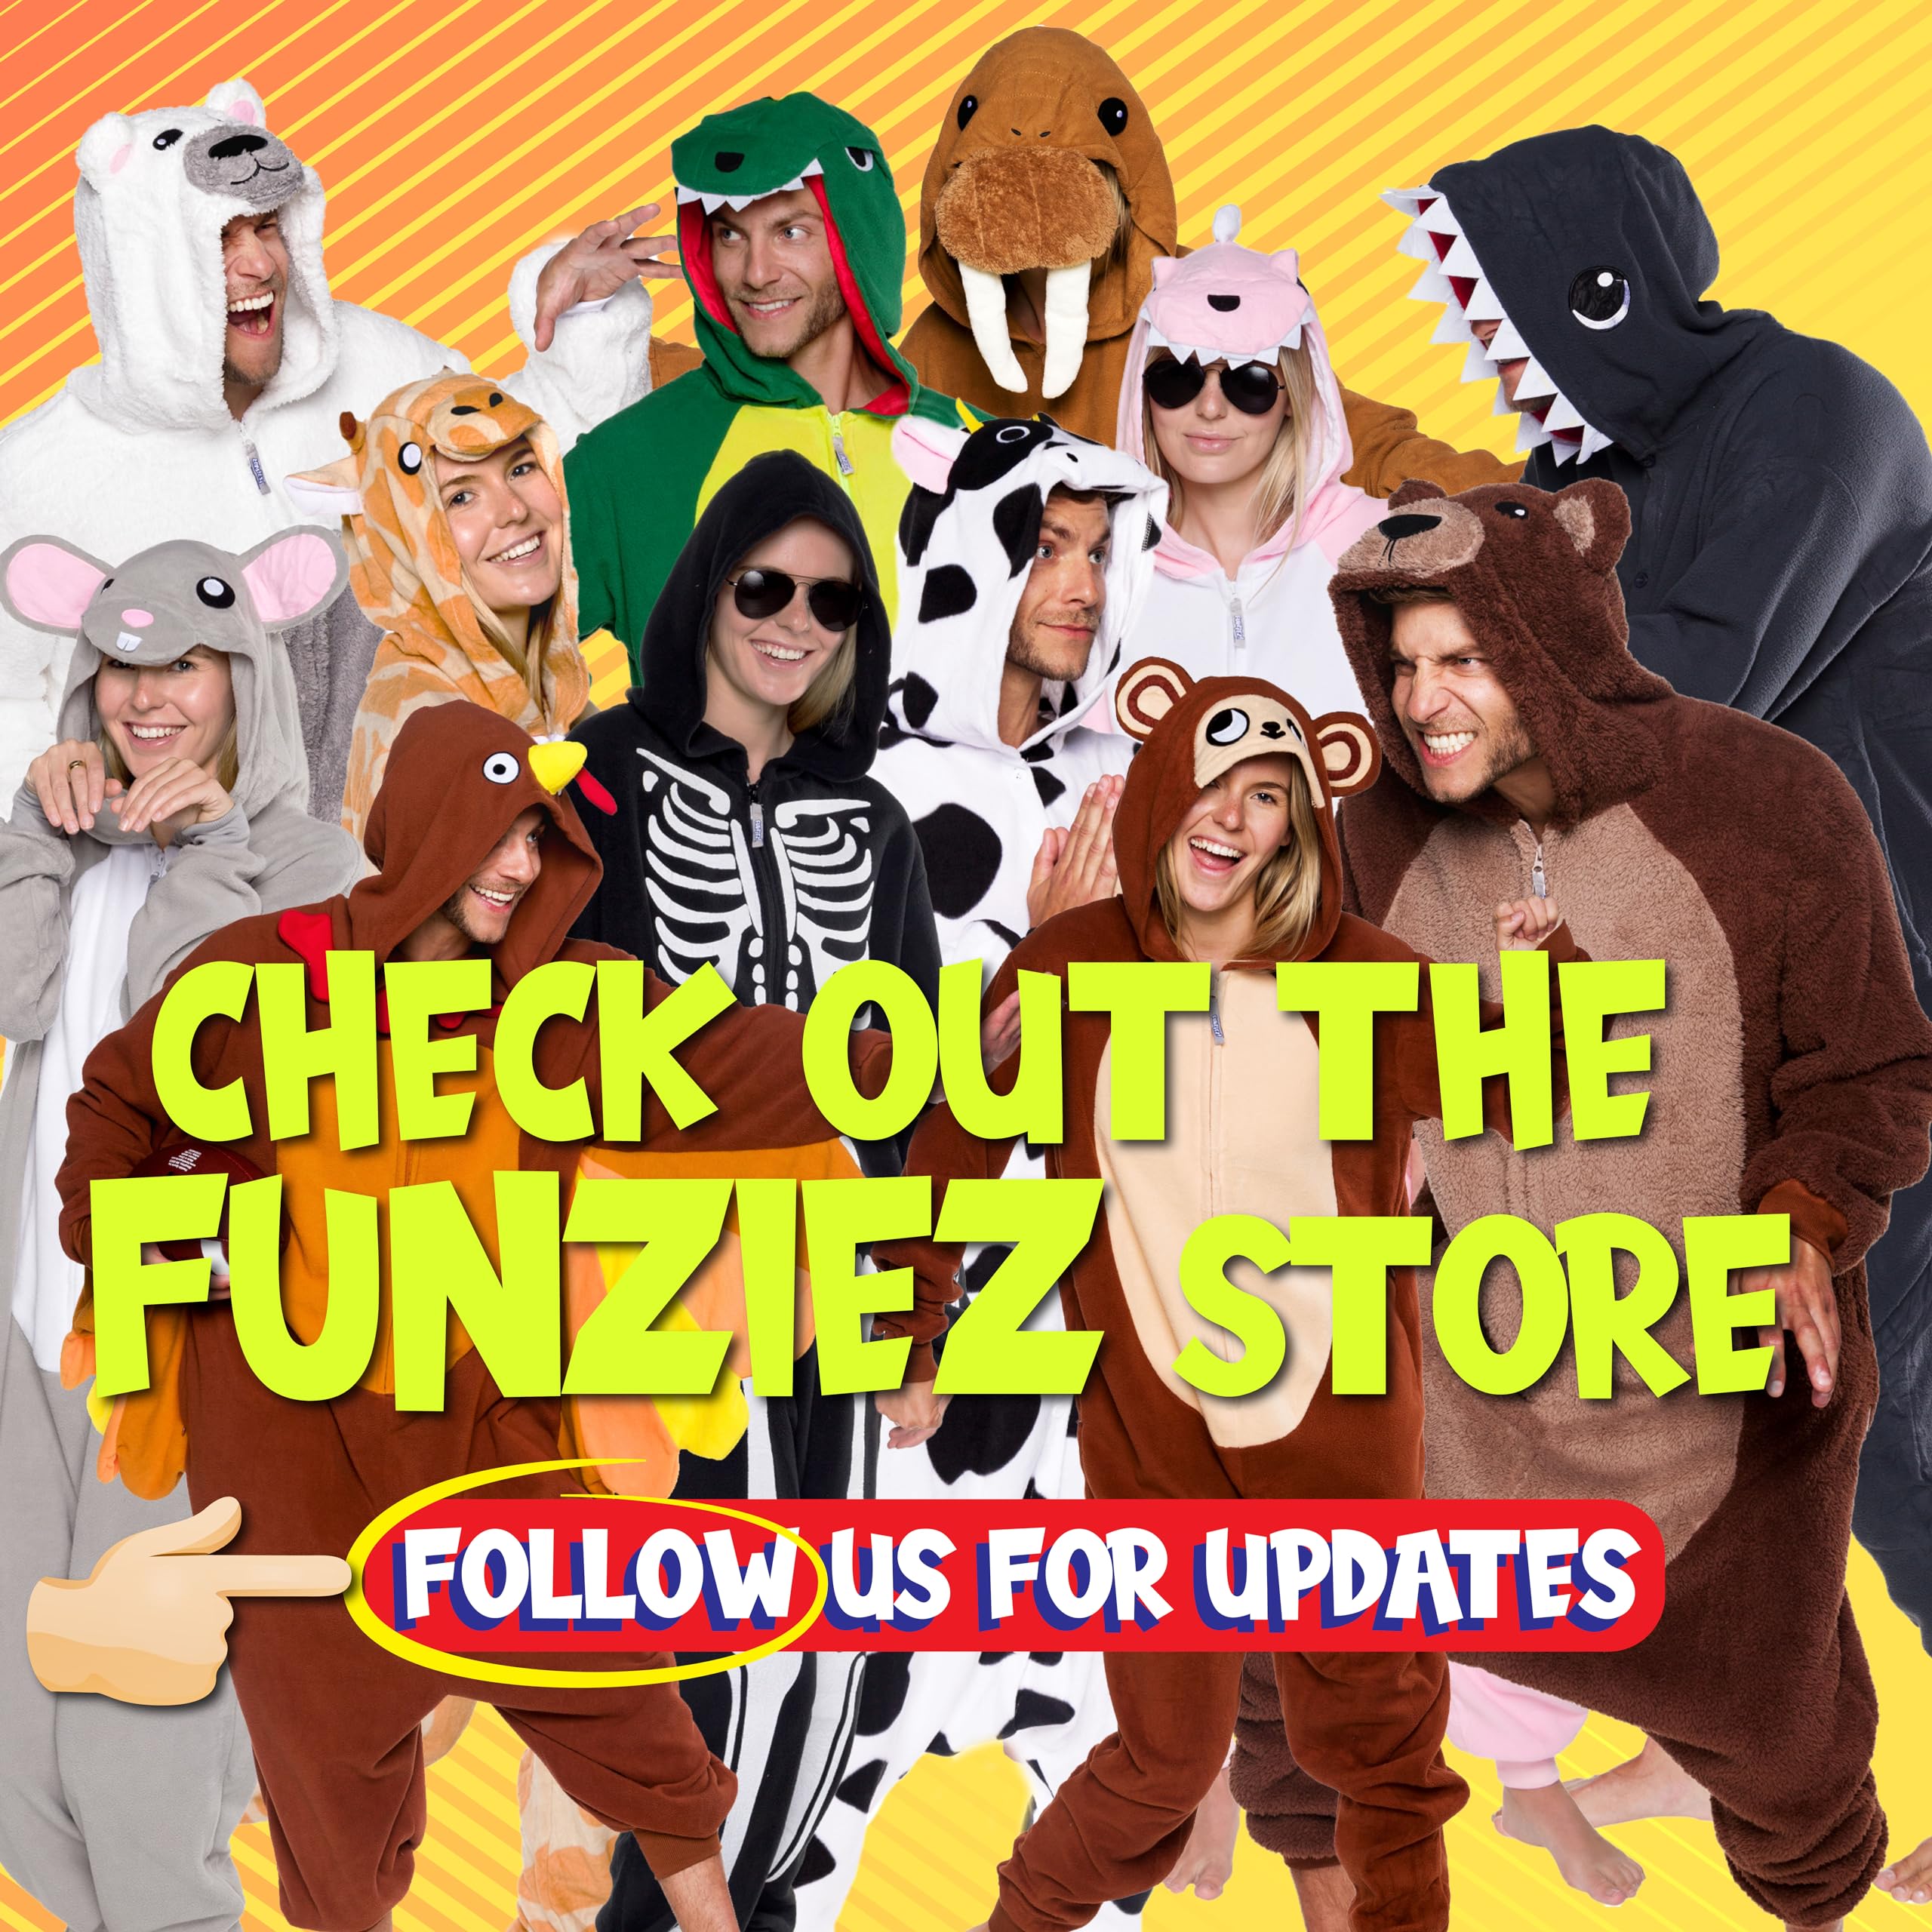 Funziez! Adult Onesie Halloween Costume - Animal and Sea Creature - Plush One Piece Cosplay Suit for Adults, Men and Women